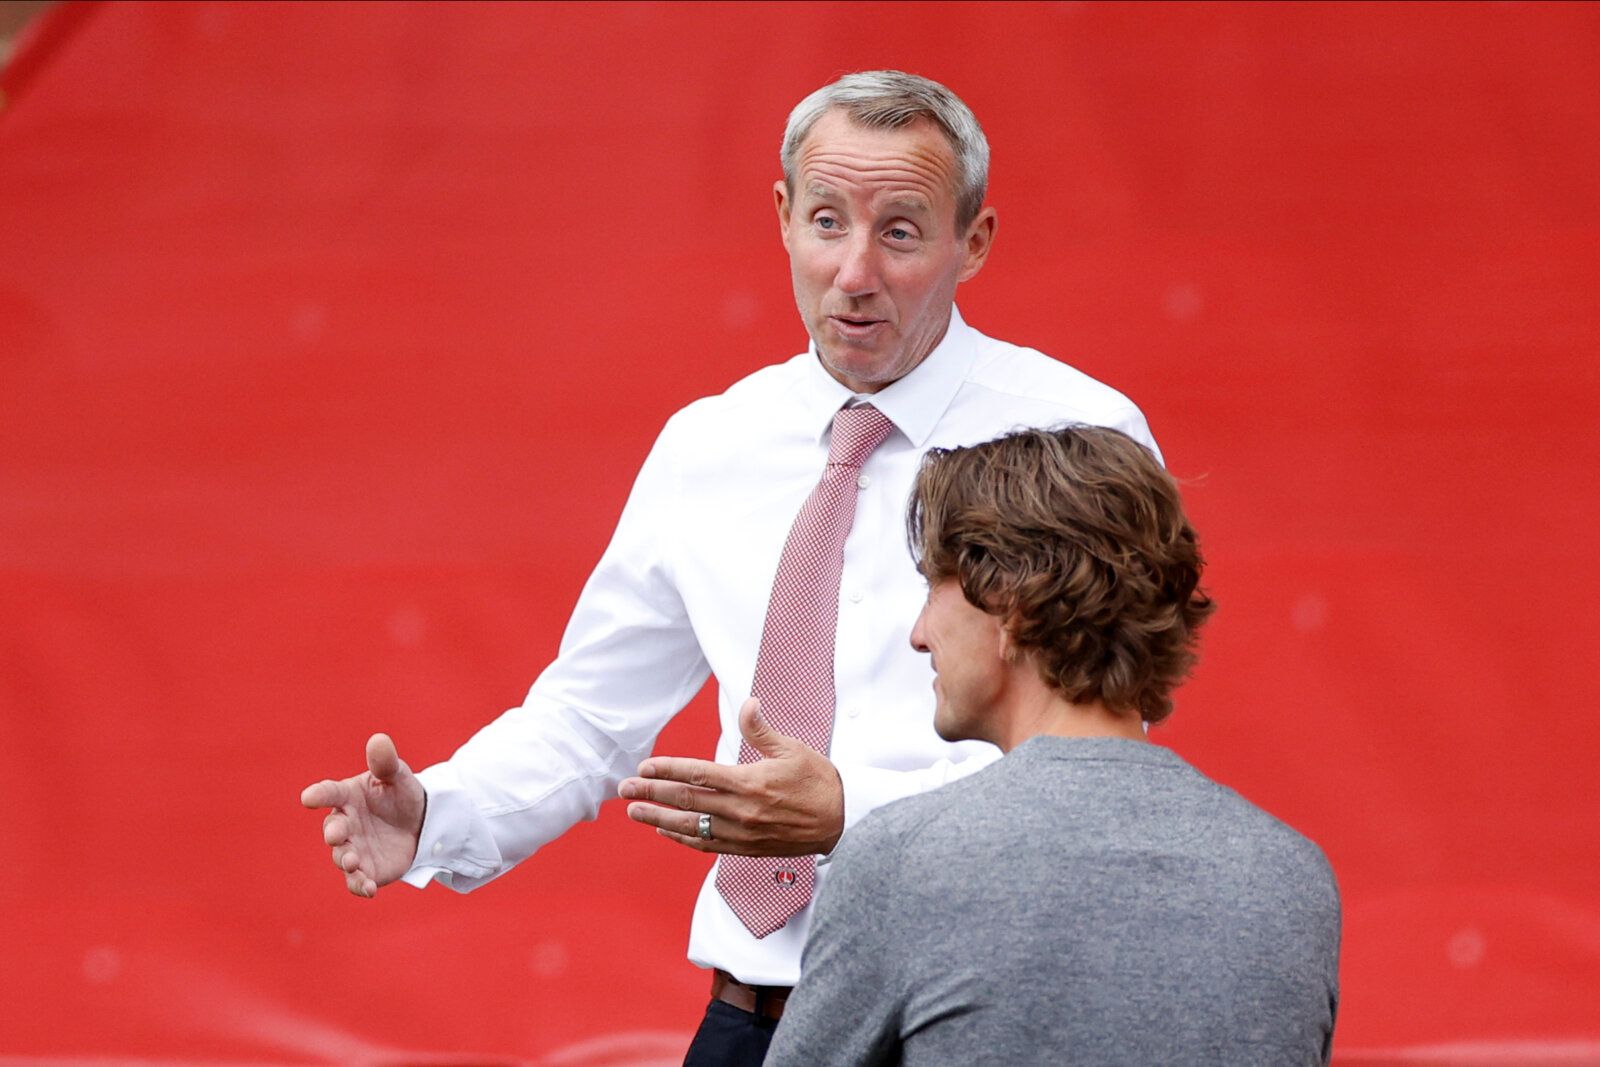 Soccer Football - Championship - Brentford v Charlton Athletic - Griffin Park, London, Britain - July 7, 2020  Brentford manager Thomas Frank and Charlton Athletic manager Lee Bowyer before the match, as play resumes behind closed doors following the outbreak of the coronavirus disease (COVID-19)  Action Images/John Sibley  EDITORIAL USE ONLY. No use with unauthorized audio, video, data, fixture lists, club/league logos or 